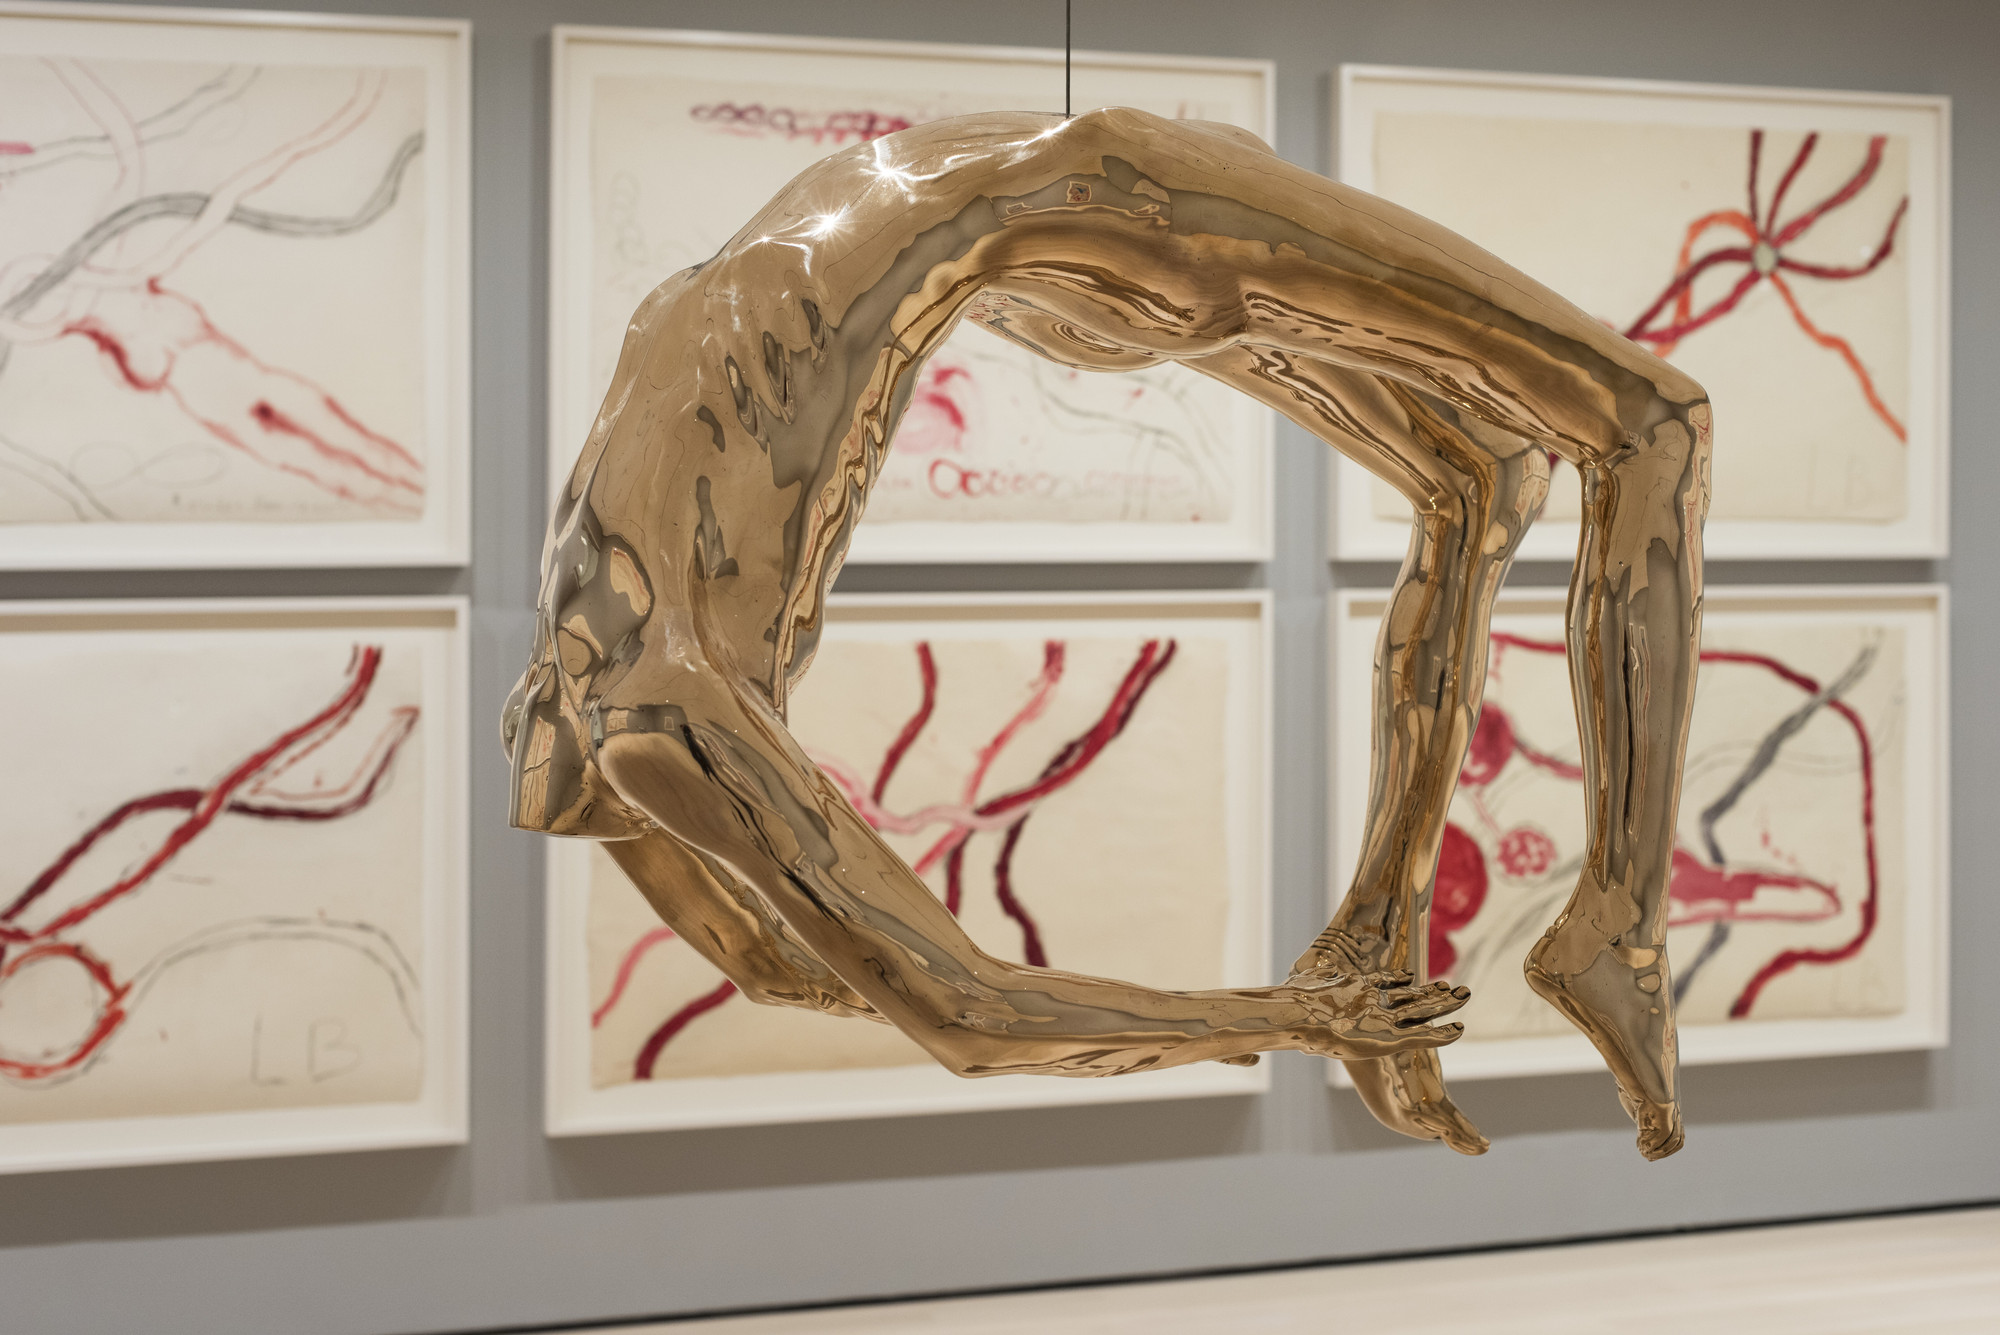 An Unfolding Portrait: Louise Bourgeois at the Museum of Modern Art